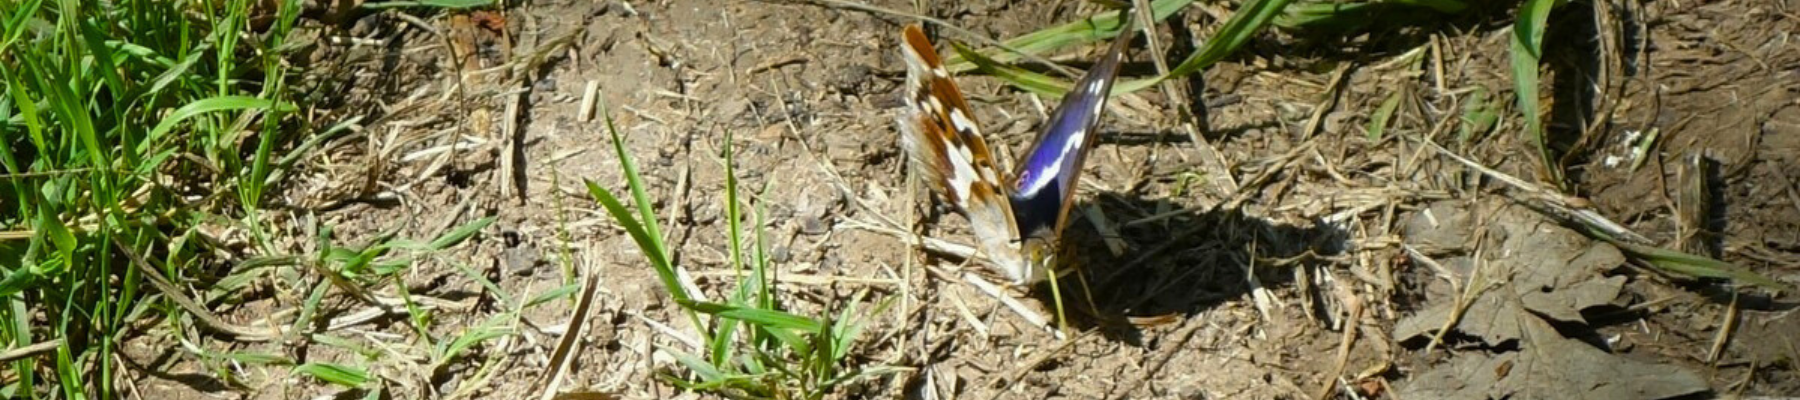 A male purple emperor butterfly on the Forest floor.